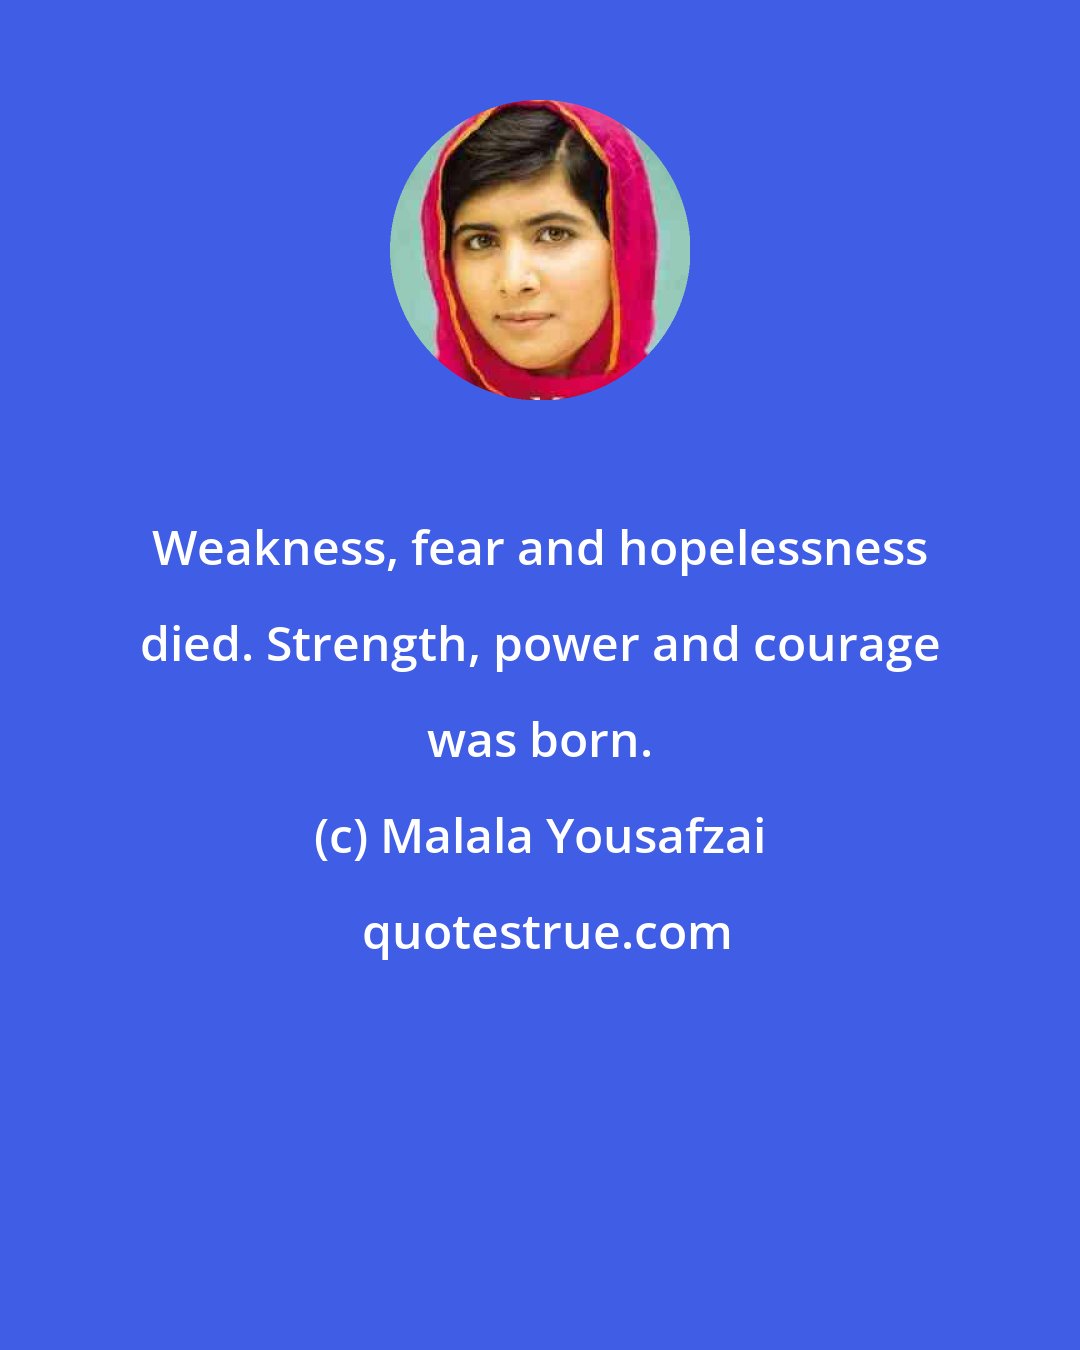 Malala Yousafzai: Weakness, fear and hopelessness died. Strength, power and courage was born.